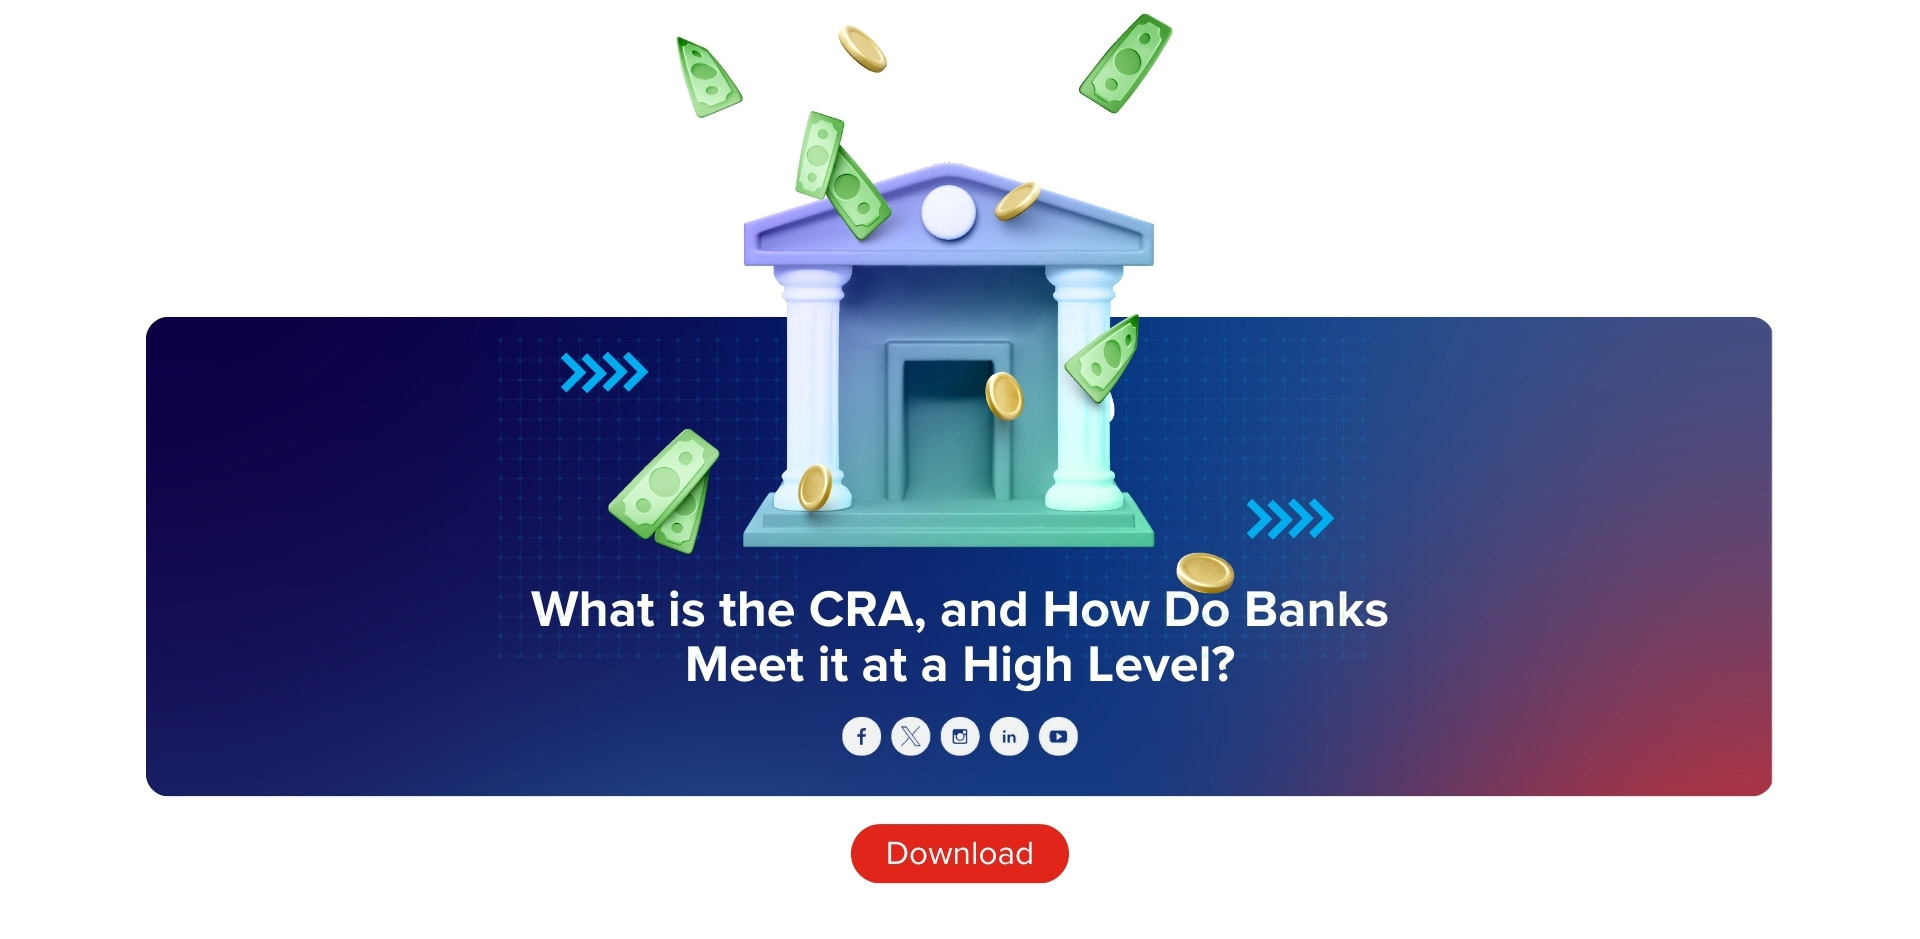 Ebook-5-What-is-the-CRA,-and-How-Do-Banks-Meet-it-at-a-High-Level-1